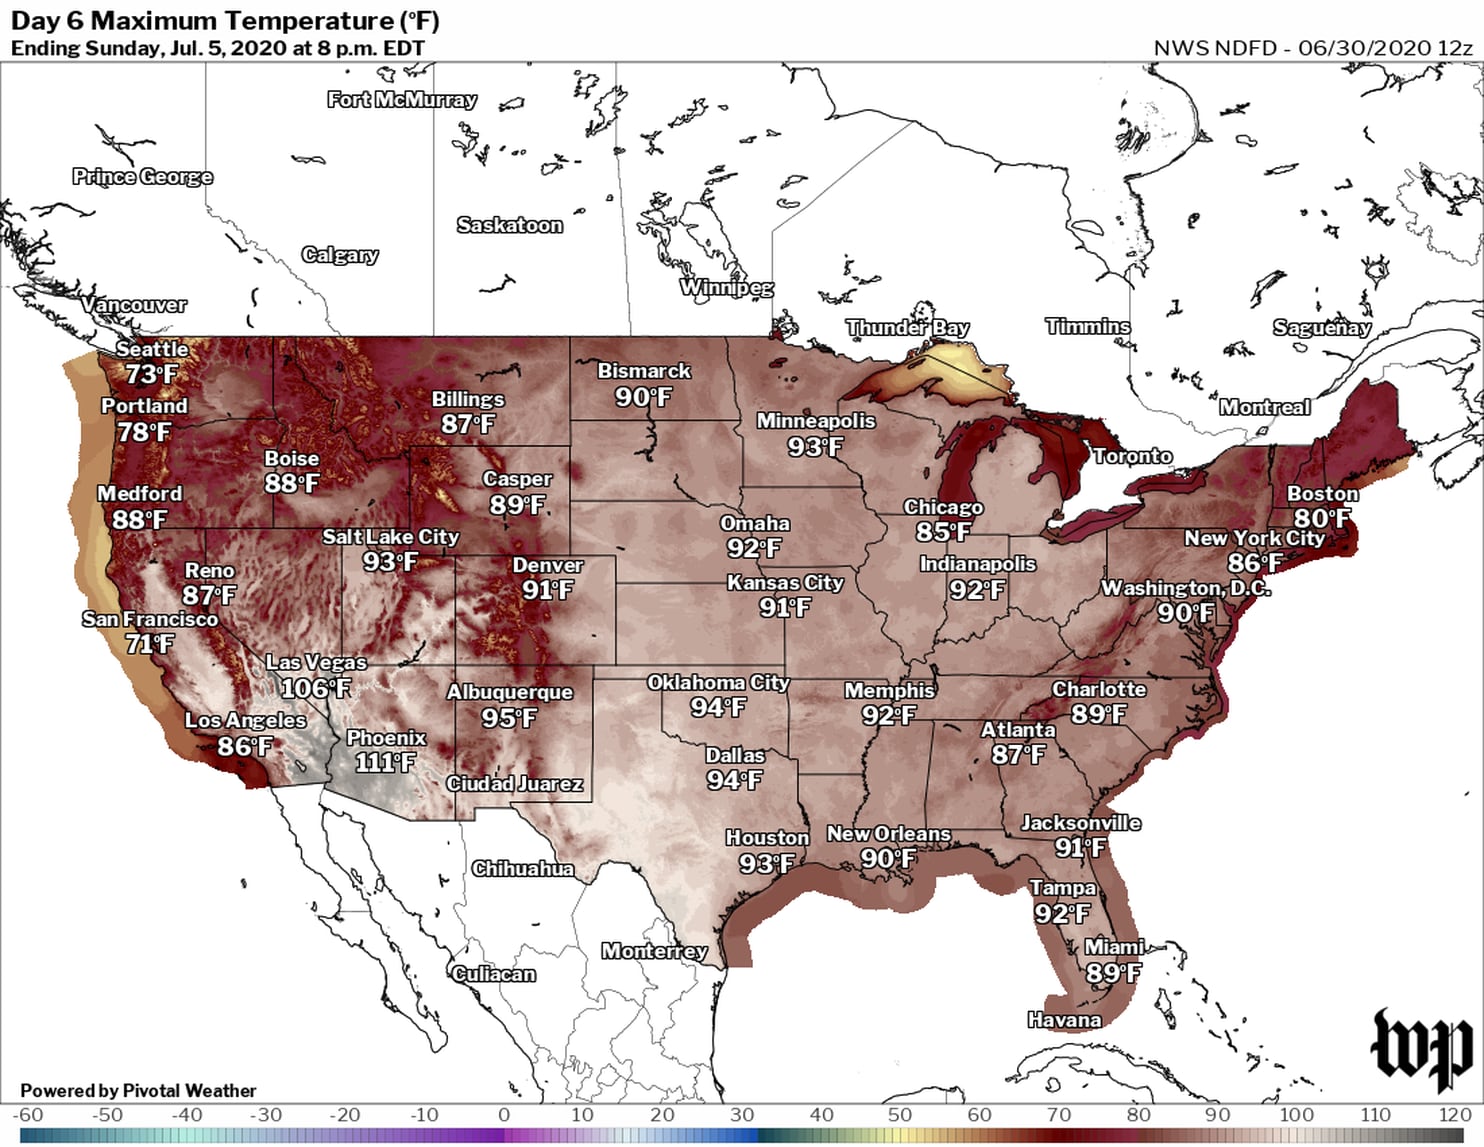 Abnormally hot weather awaits much of Lower 48 in early July